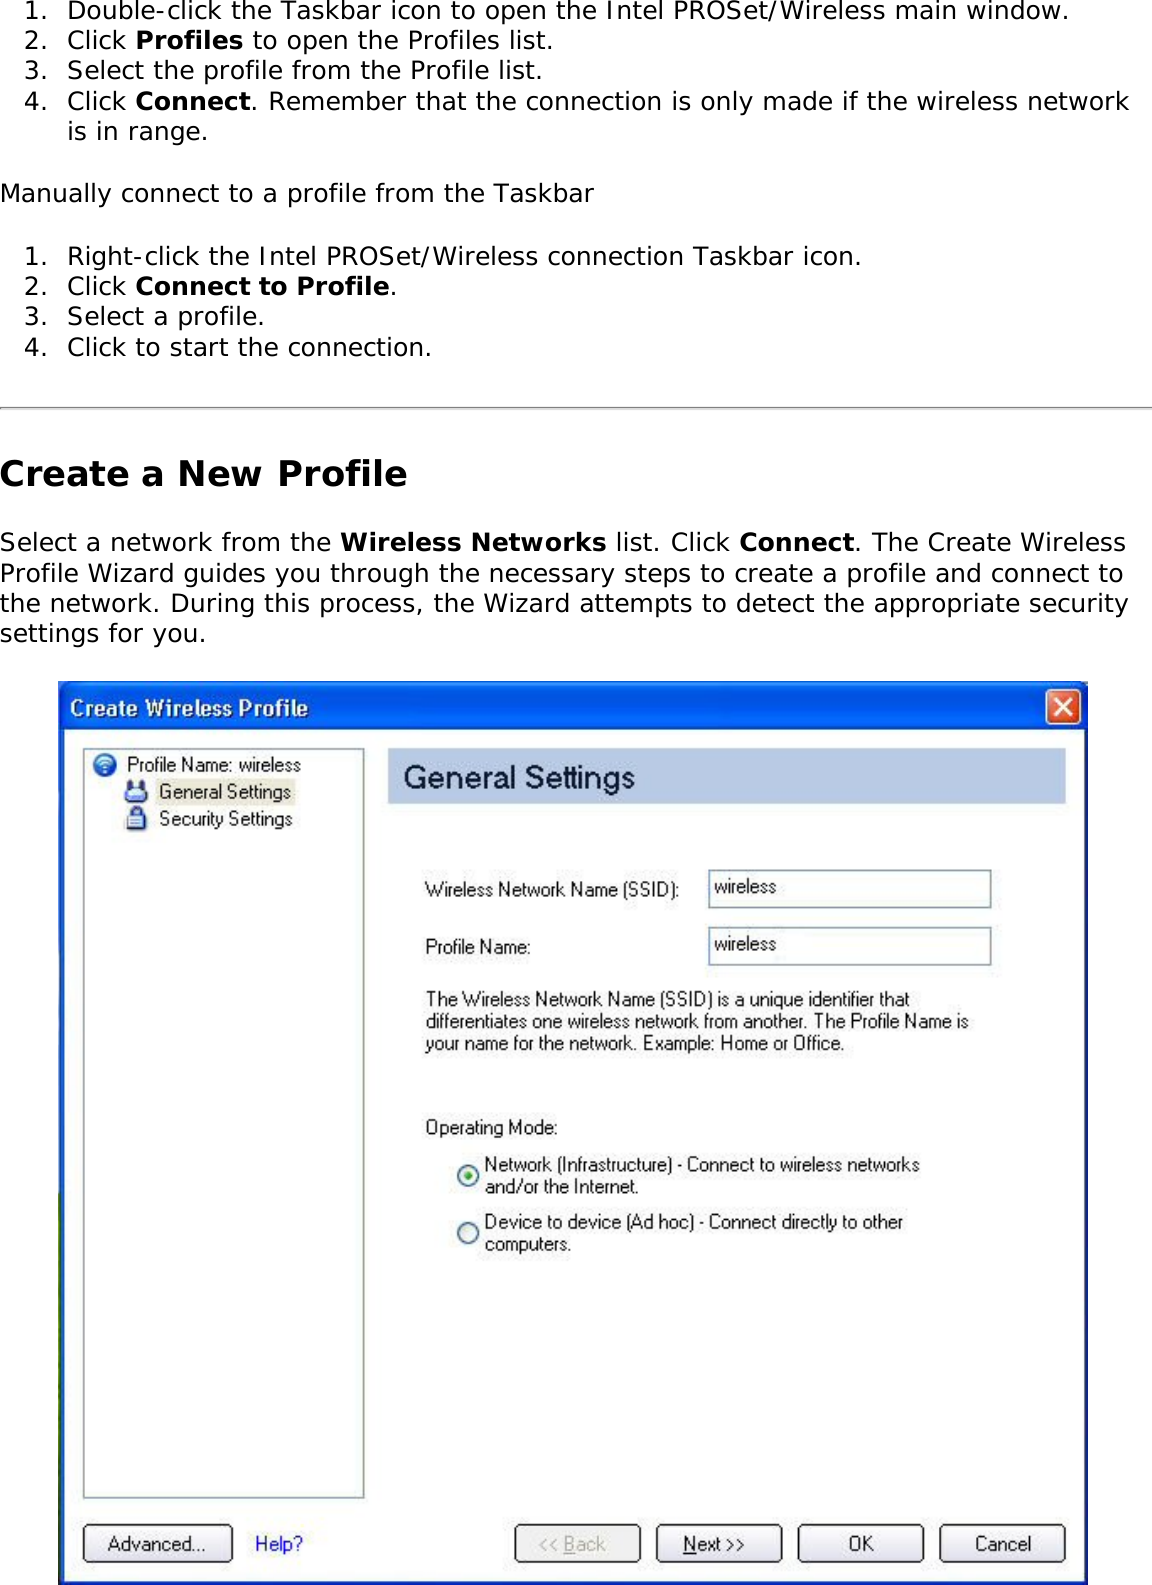 1.  Double-click the Taskbar icon to open the Intel PROSet/Wireless main window.2.  Click Profiles to open the Profiles list.3.  Select the profile from the Profile list. 4.  Click Connect. Remember that the connection is only made if the wireless network is in range. Manually connect to a profile from the Taskbar 1.  Right-click the Intel PROSet/Wireless connection Taskbar icon. 2.  Click Connect to Profile. 3.  Select a profile.4.  Click to start the connection.Create a New ProfileSelect a network from the Wireless Networks list. Click Connect. The Create Wireless Profile Wizard guides you through the necessary steps to create a profile and connect to the network. During this process, the Wizard attempts to detect the appropriate security settings for you. 